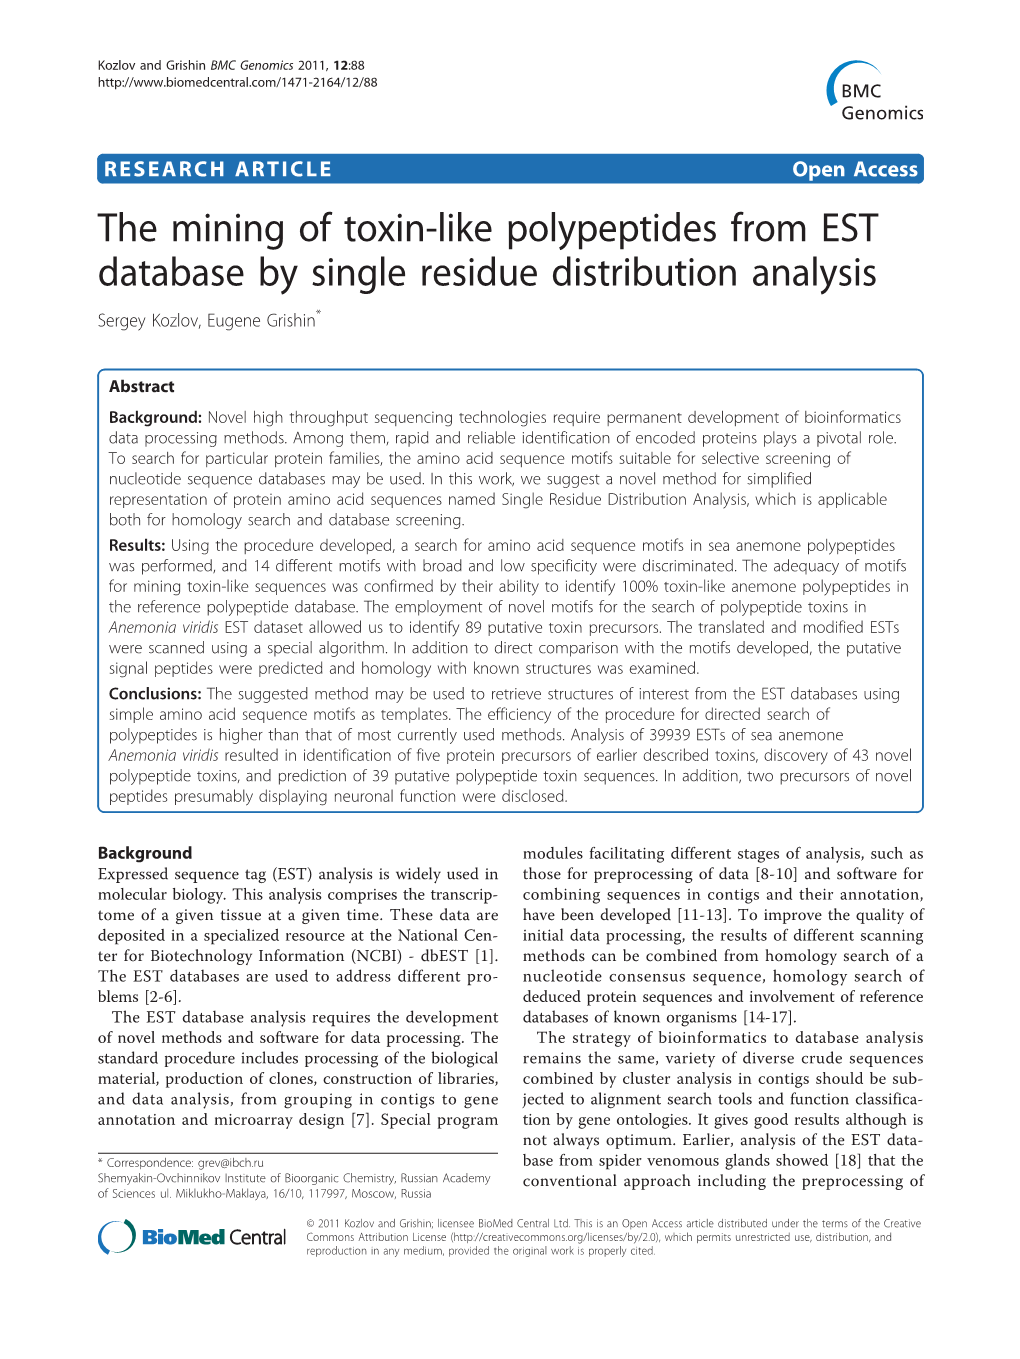 The Mining of Toxin-Like Polypeptides from EST Database by Single Residue Distribution Analysis Sergey Kozlov, Eugene Grishin*